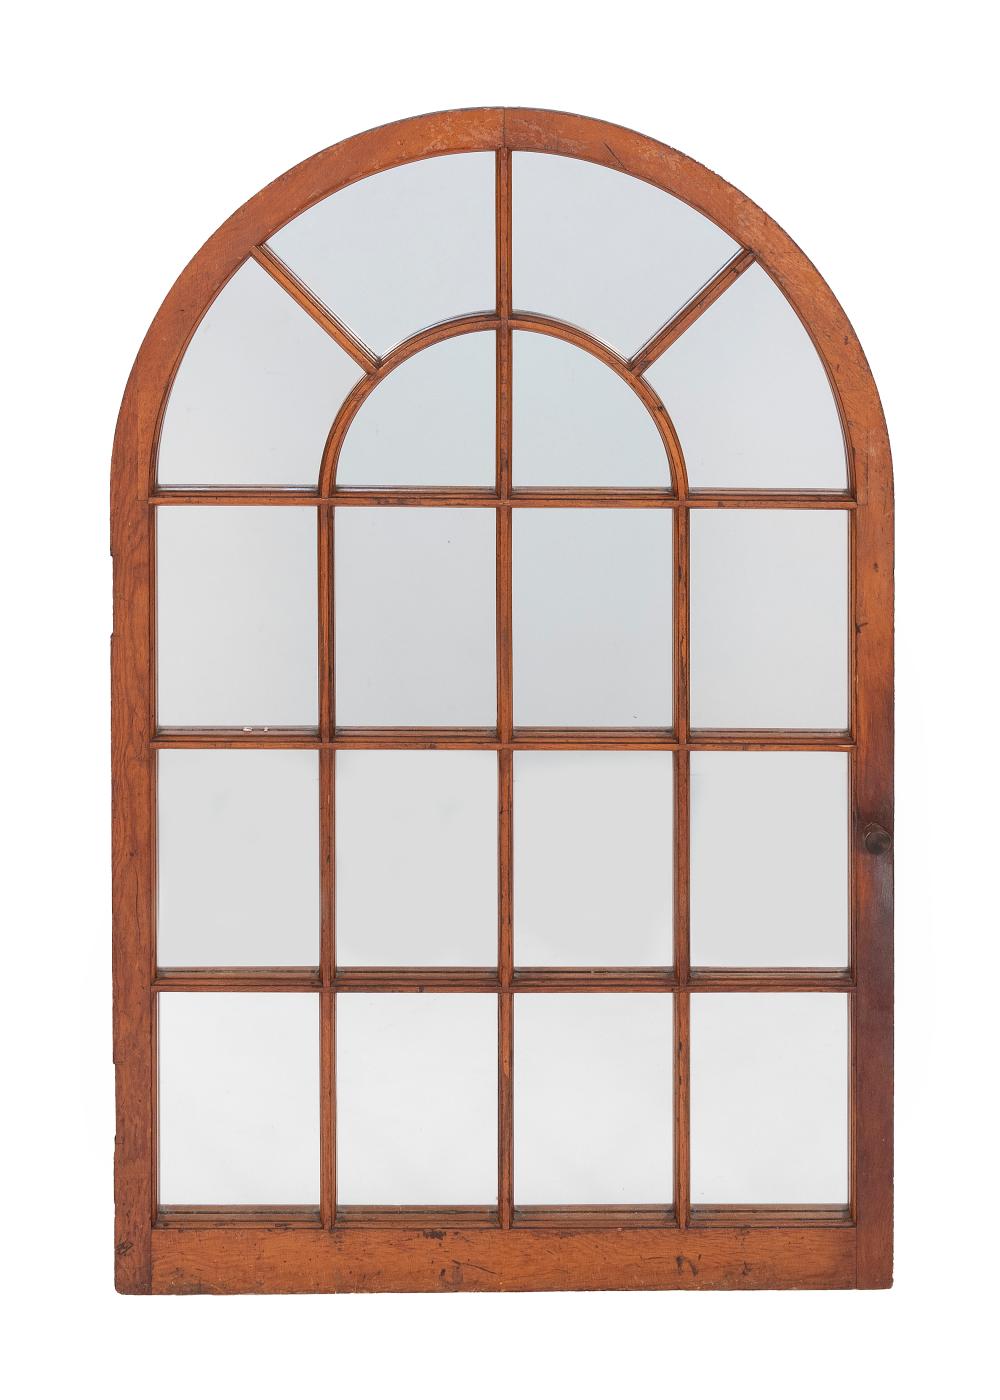 ARCHED MIRROR HEIGHT 45.5". WIDTH